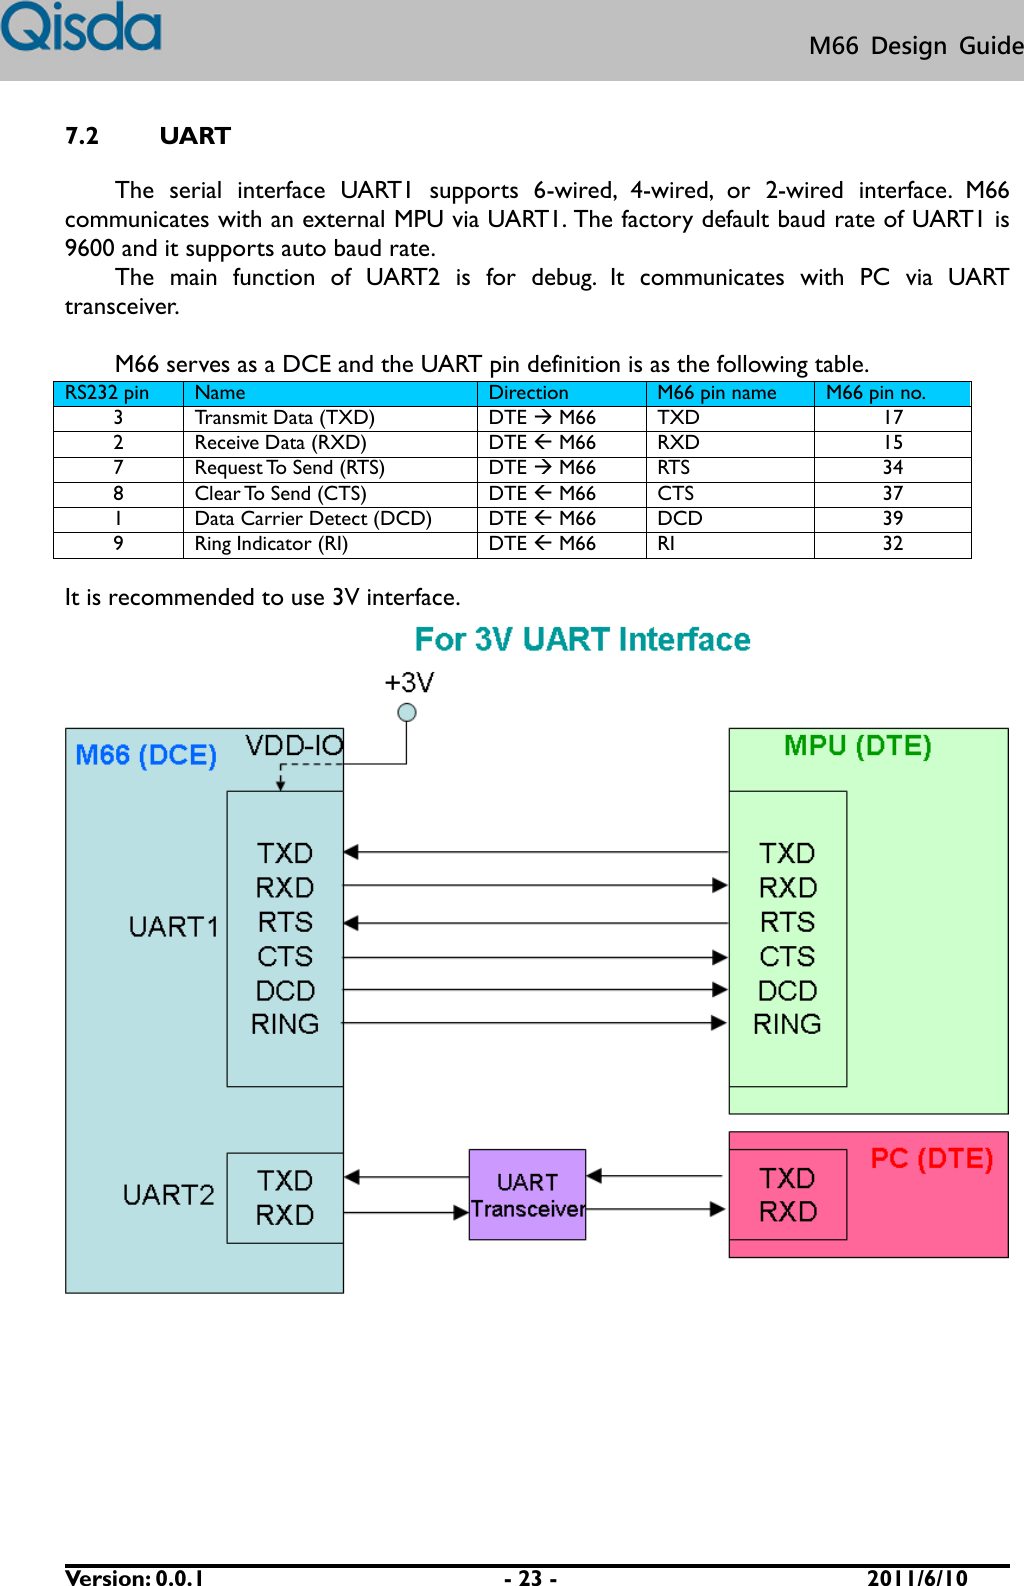      Version: 0.0.1                          - 23 -                           2011/6/10 M66  Design  Guide 7.2 UART The  serial  interface  UART1  supports  6-wired,  4-wired,  or  2-wired  interface.  M66 communicates with an external MPU via UART1. The factory default baud rate of UART1 is 9600 and it supports auto baud rate. The  main  function  of  UART2  is  for  debug.  It  communicates  with  PC  via  UART transceiver.  M66 serves as a DCE and the UART pin definition is as the following table. RS232 pin Name Direction M66 pin name M66 pin no. 3 Transmit Data (TXD) DTE  M66 TXD 17 2 Receive Data (RXD) DTE  M66 RXD 15 7 Request To Send (RTS) DTE  M66 RTS 34 8 Clear To Send (CTS) DTE  M66 CTS 37 1 Data Carrier Detect (DCD) DTE  M66 DCD 39 9 Ring Indicator (RI) DTE  M66 RI 32  It is recommended to use 3V interface.         